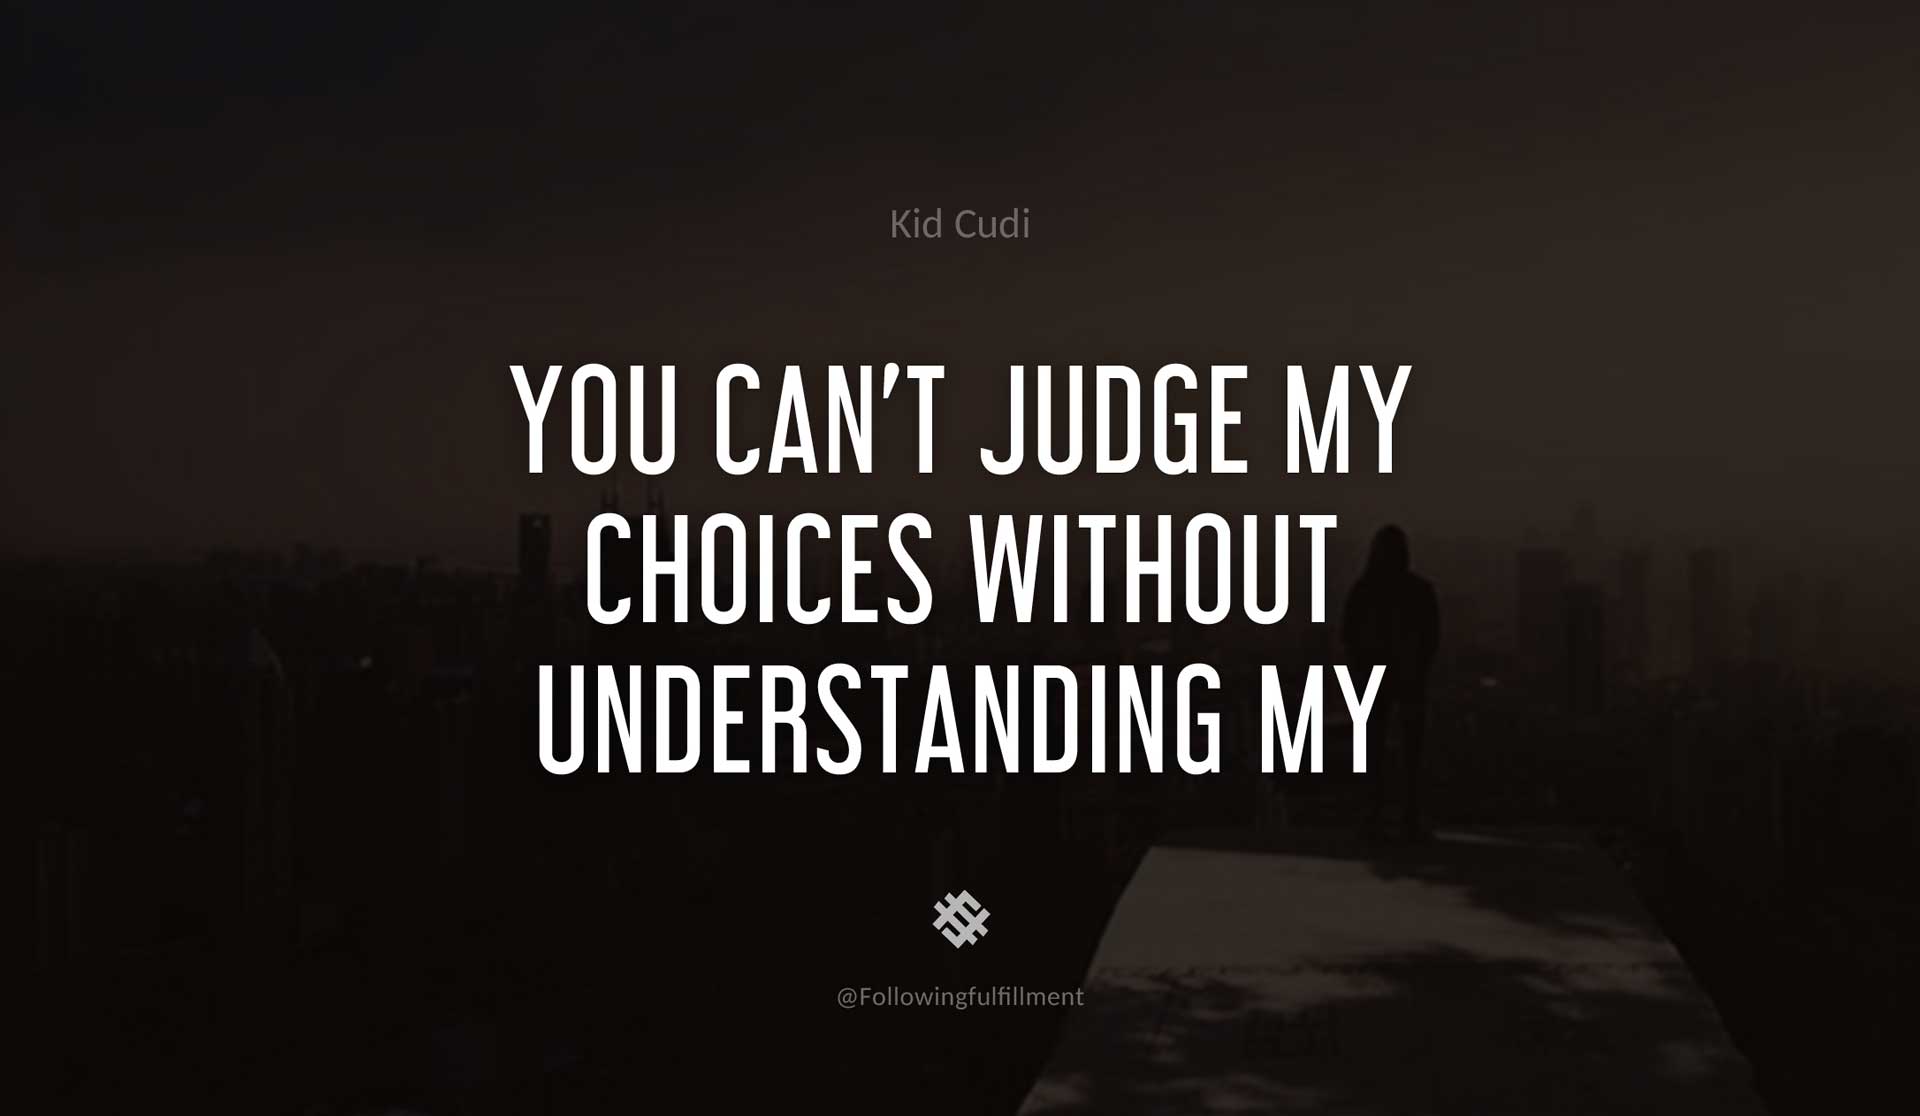 You-can't-judge-my-choices-without-understanding-my-reasons.-KID-CUDI-Quote.jpg